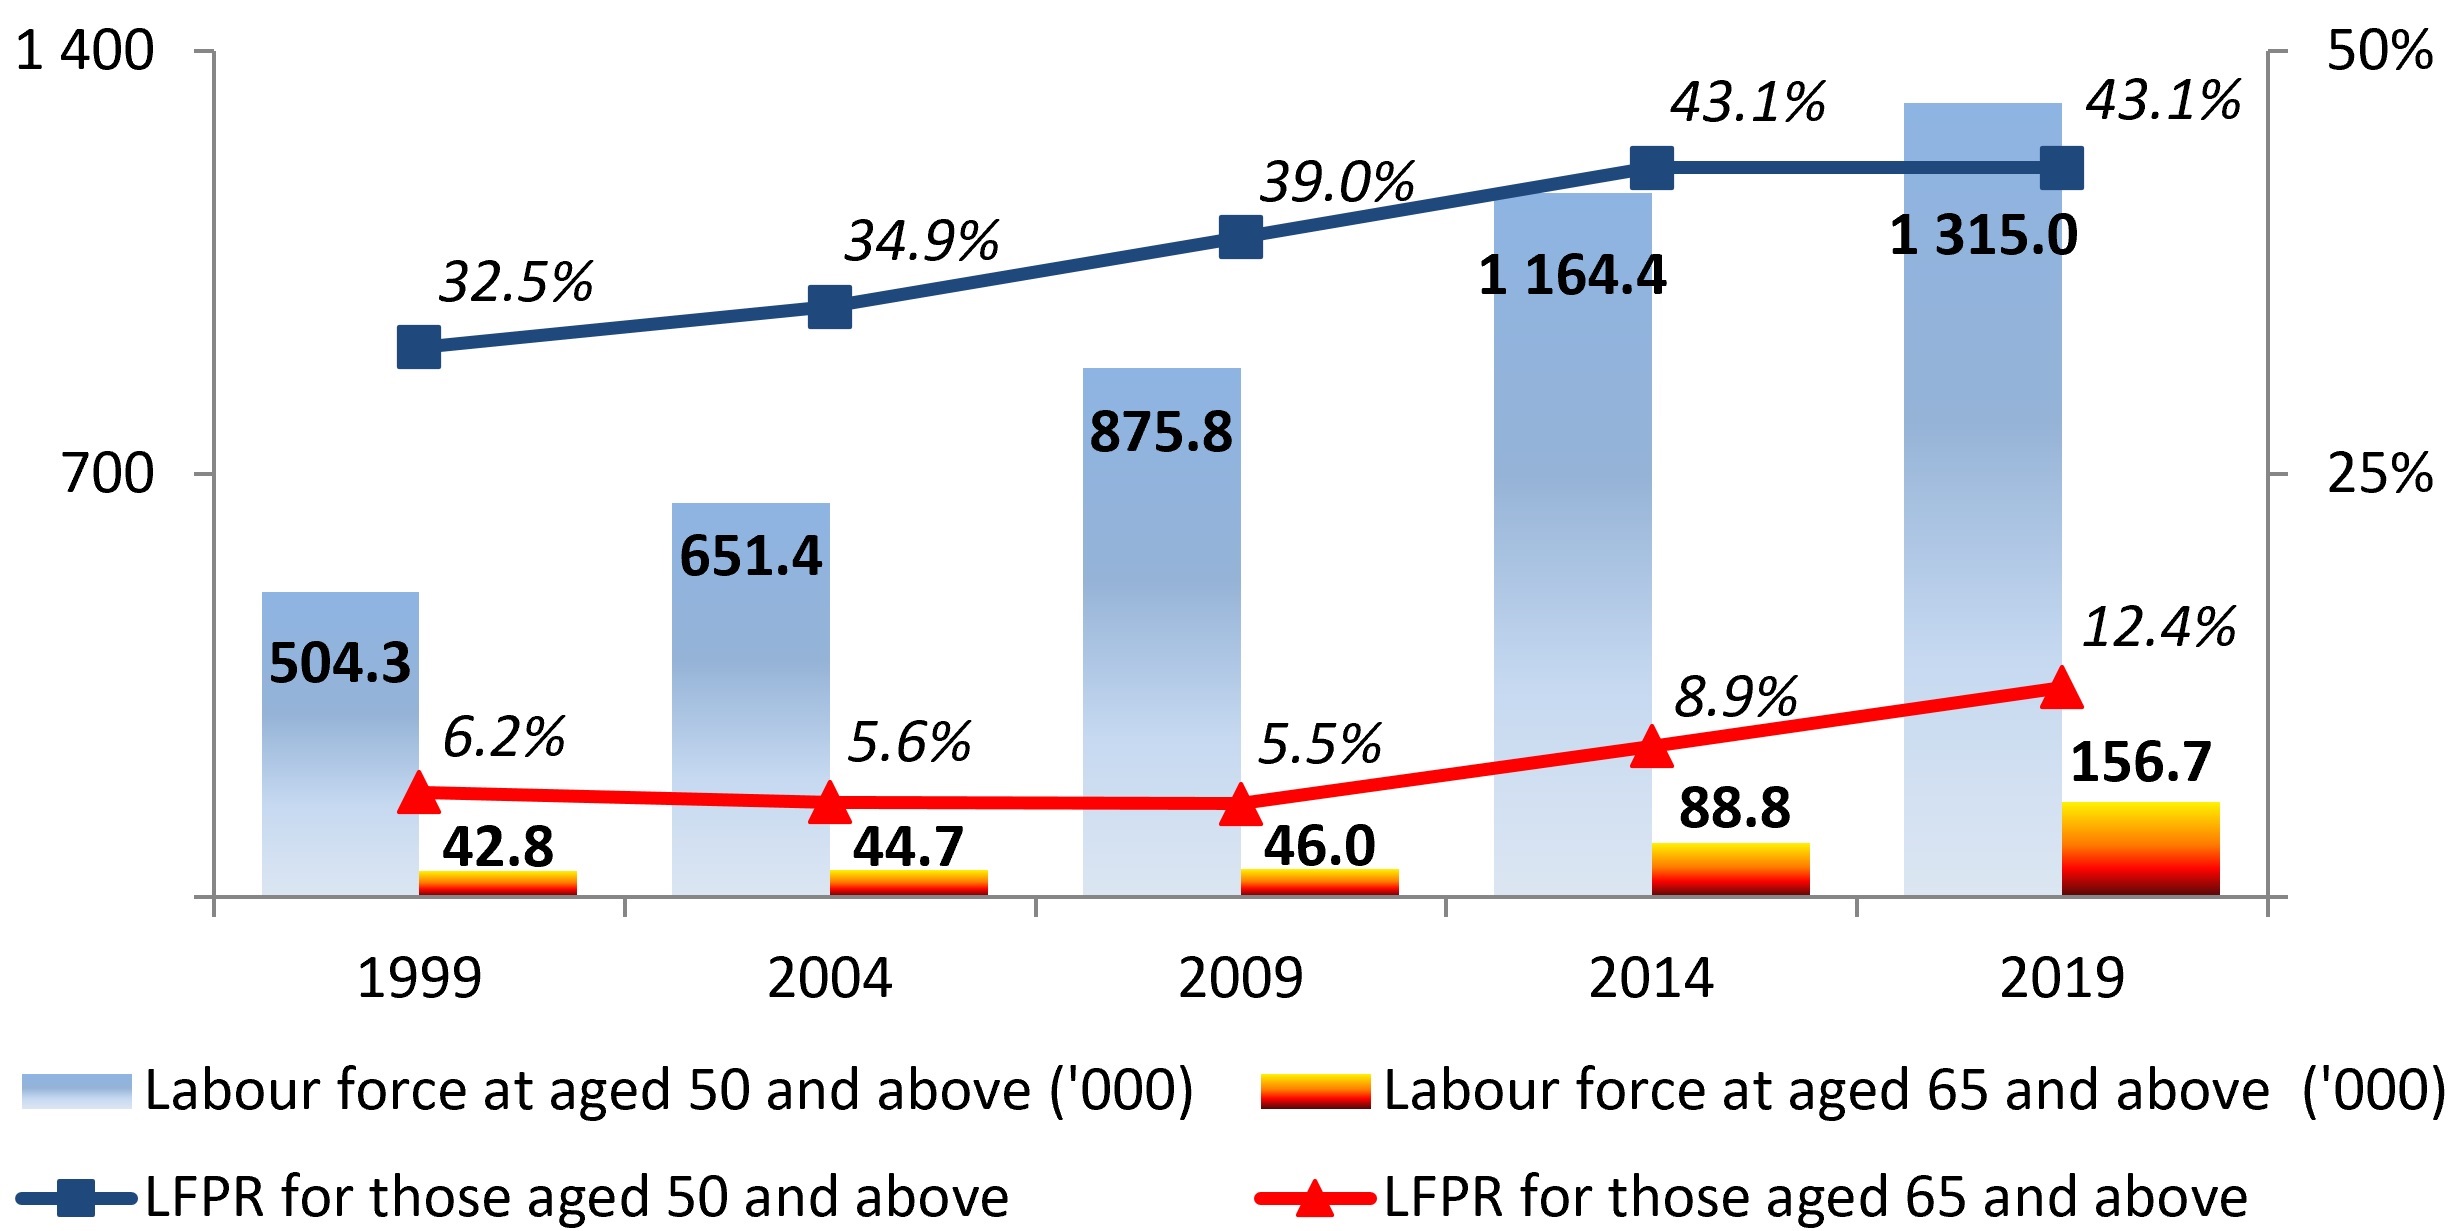 Figure 1 - Labour force and LFPR of mature workers in Hong Kong, 1999-2019